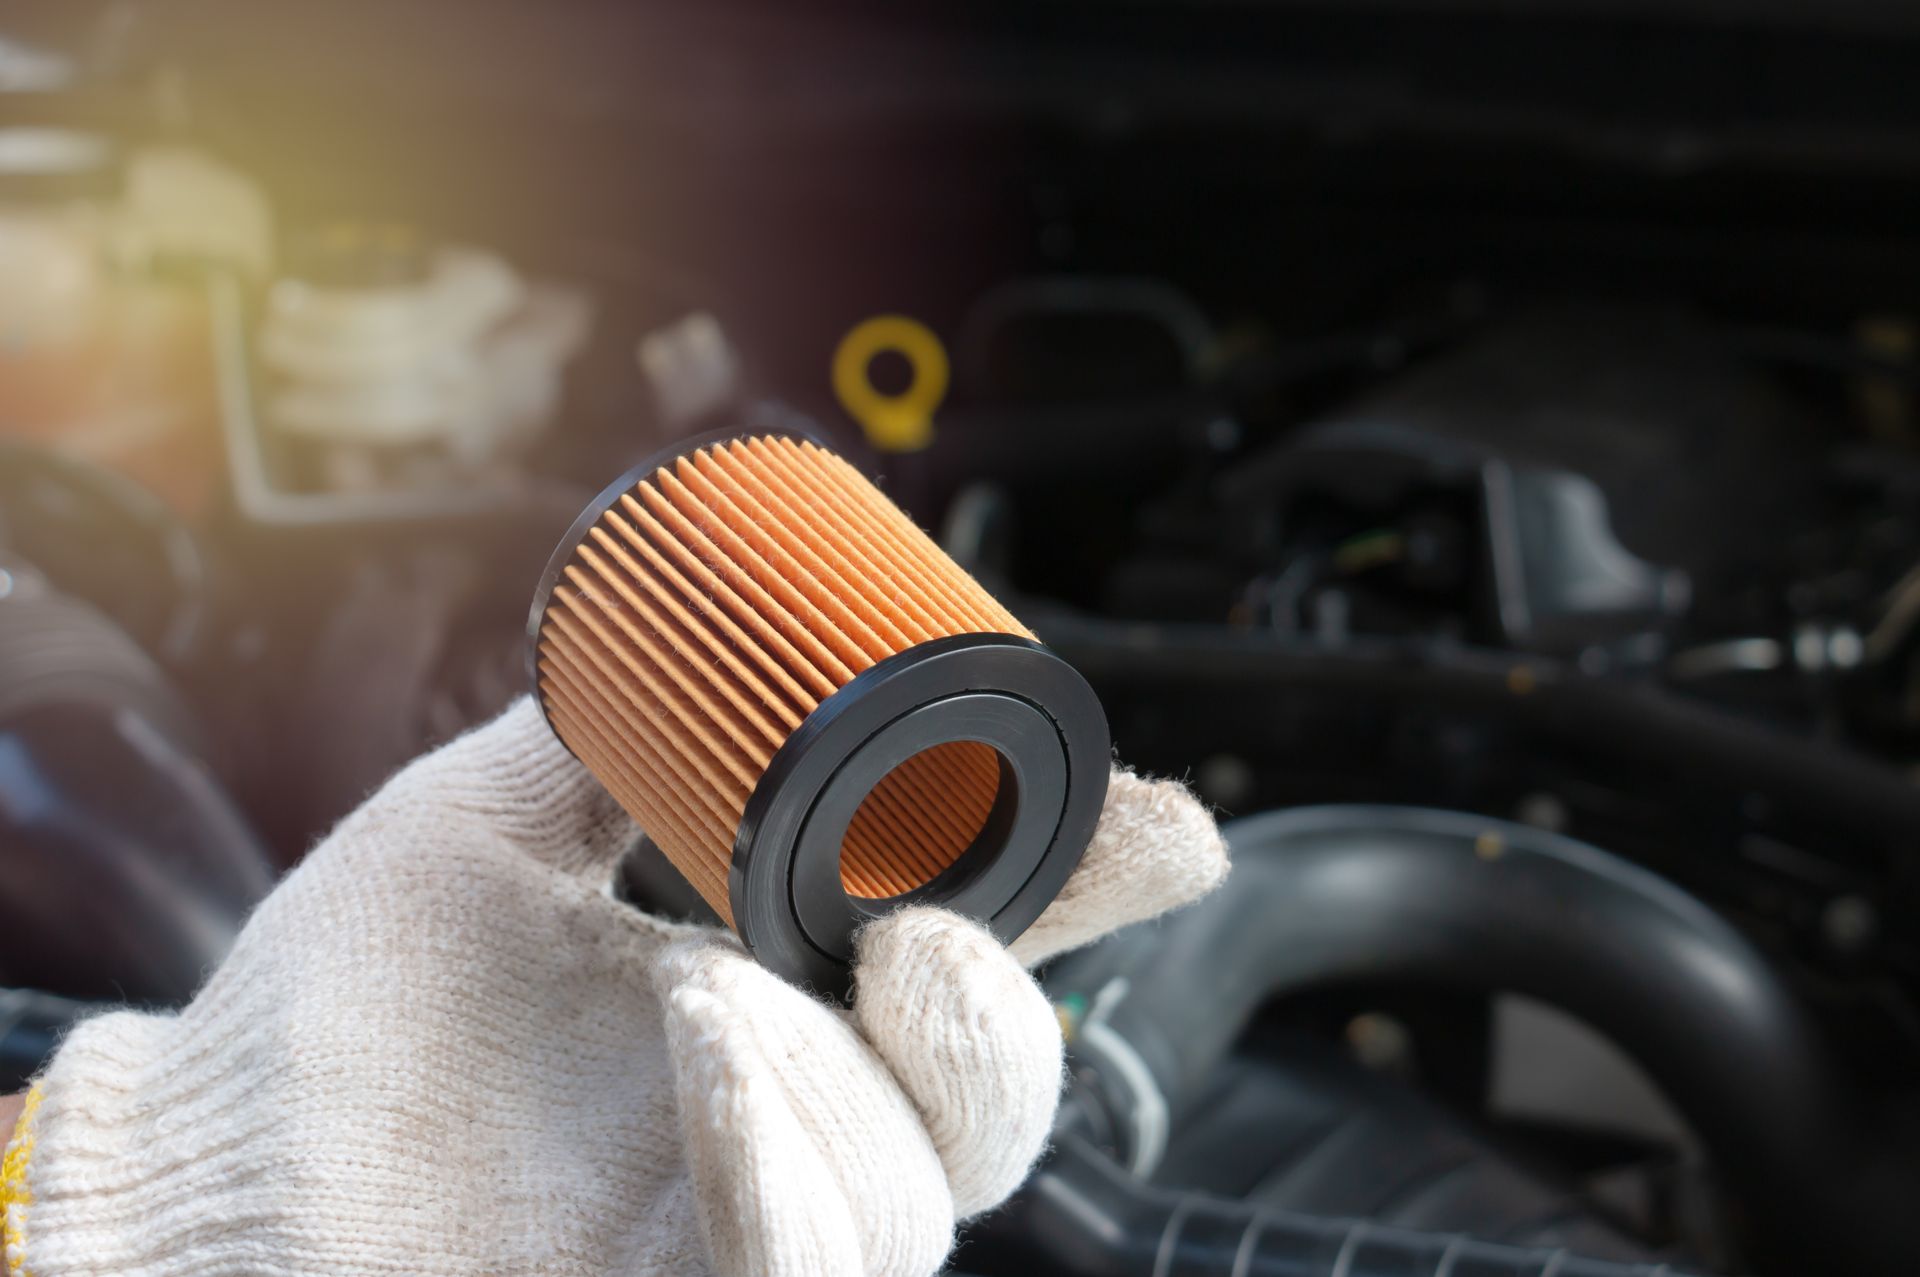 Fuel Filter Service at ﻿Terry's Automotive Group﻿ in ﻿Olympia, WA﻿